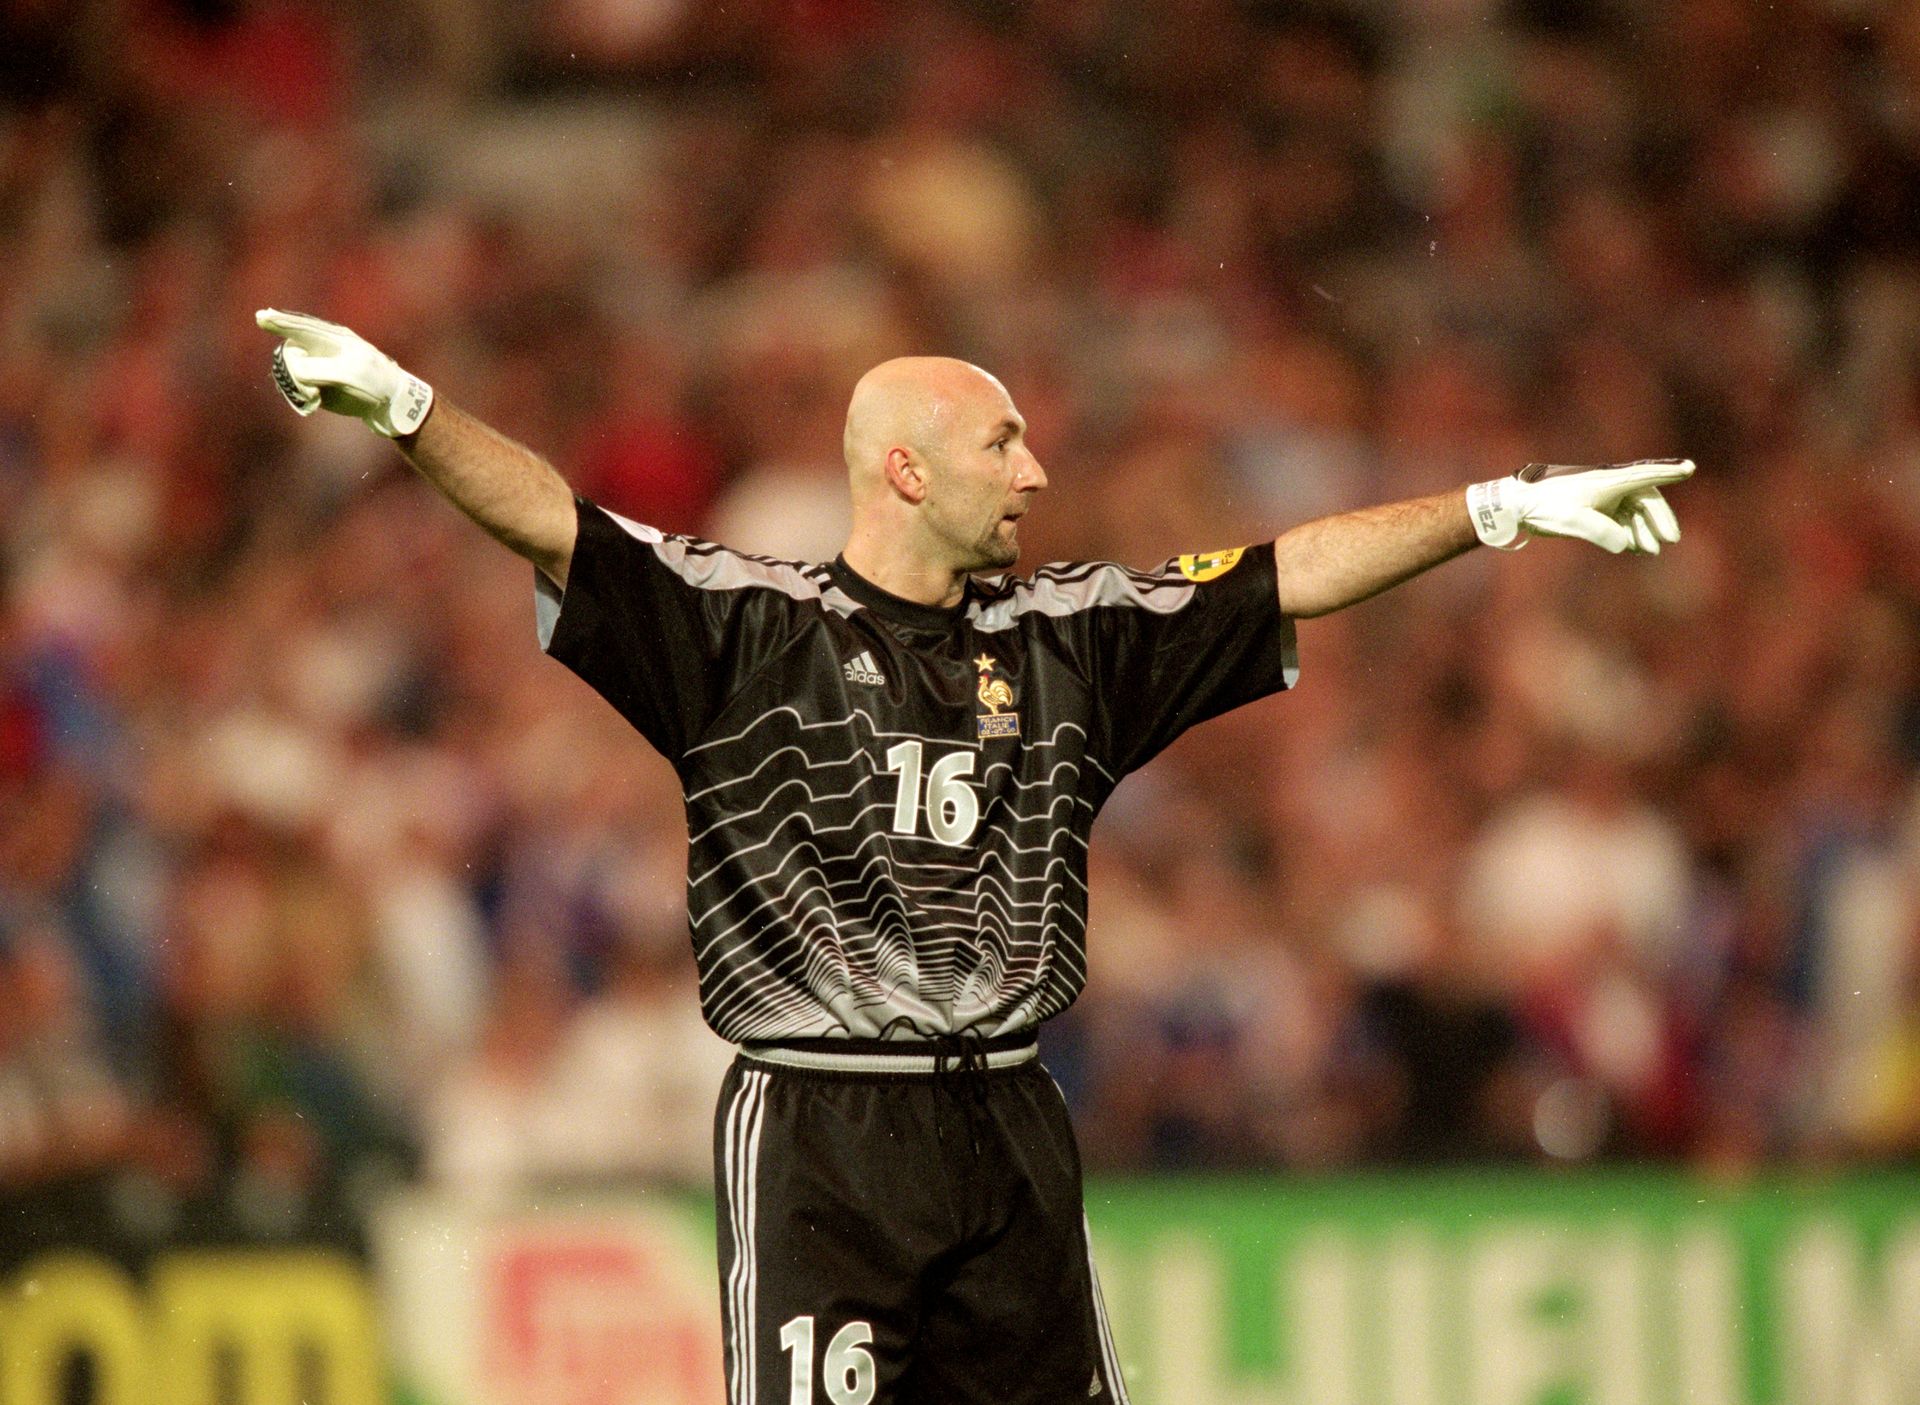 <p>                     Fabien Barthez started off the 2000s by helping France follow up their 1998 World Cup win with the title at Euro 2000.                   </p>                                      <p>                     A two-time Premier League winner with Manchester United in 2001 and 2002, Barthez played in another World Cup final with France in 2006 and made a record 17 World Cup appearances for Les Bleus in 87 caps overall. Named by IFFHS as world's best goalkeeper in 2000.                   </p>